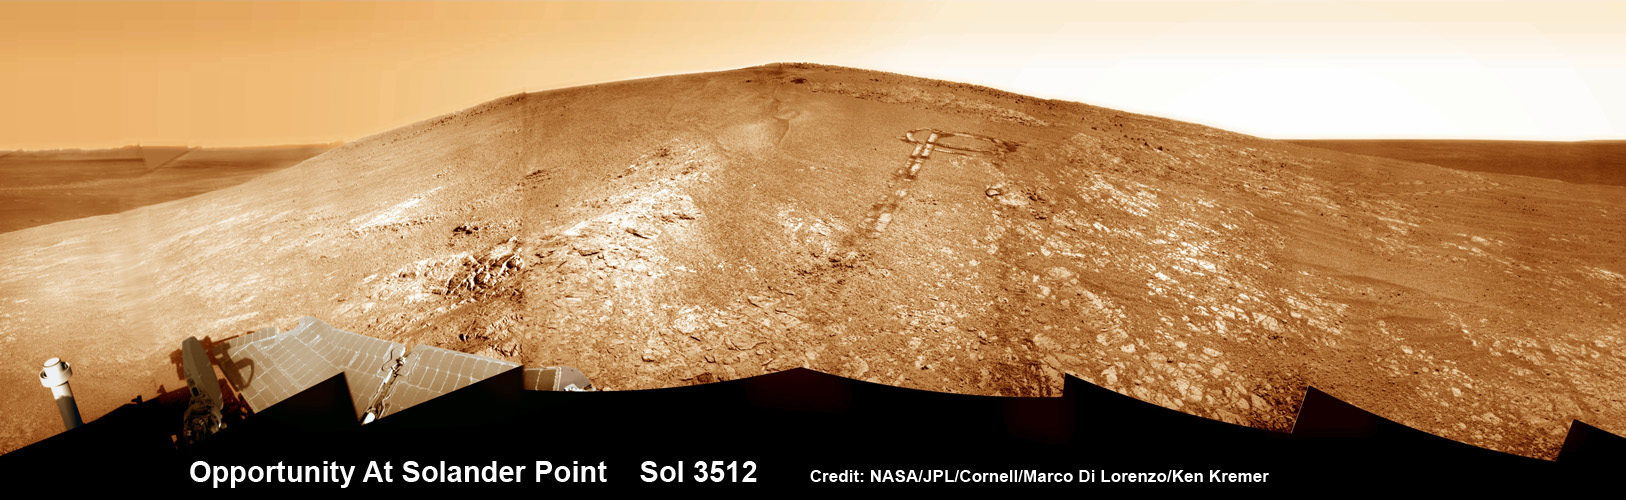 Opportunity by Solander Point peak—2nd Mars Decade Starts here! NASA’s Opportunity rover captured this panoramic mosaic on Dec. 10, 2013 (Sol 3512) near the summit of “Solander Point” on the western rim of Endeavour Crater where she starts Decade 2 on the Red Planet. She is currently investigating outcrops of potential clay minerals formed in liquid water on her 1st mountain climbing adventure. Assembled from Sol 3512 navcam raw images. Credit: NASA/JPL/Cornell/Marco Di Lorenzo/Ken Kremer-kenkremer.com